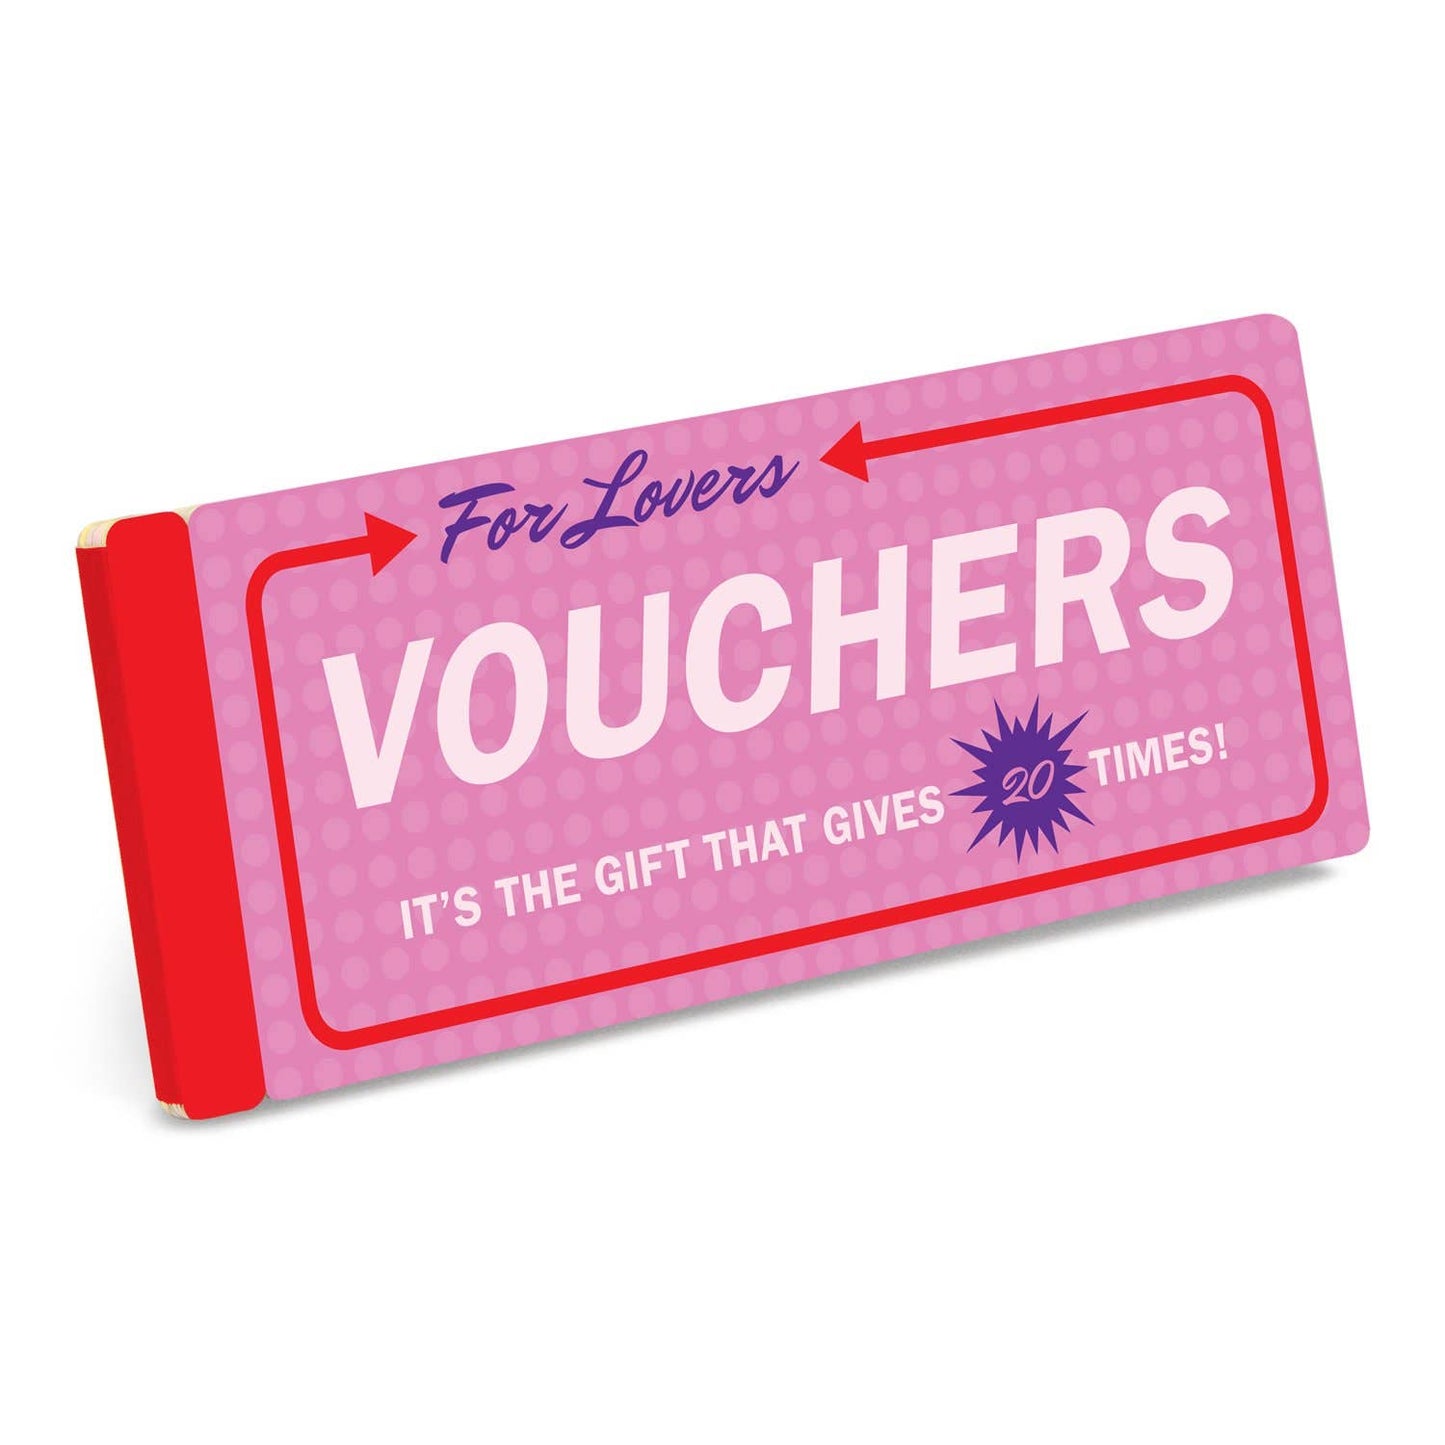 Vouchers for Lovers for Valentine's Day